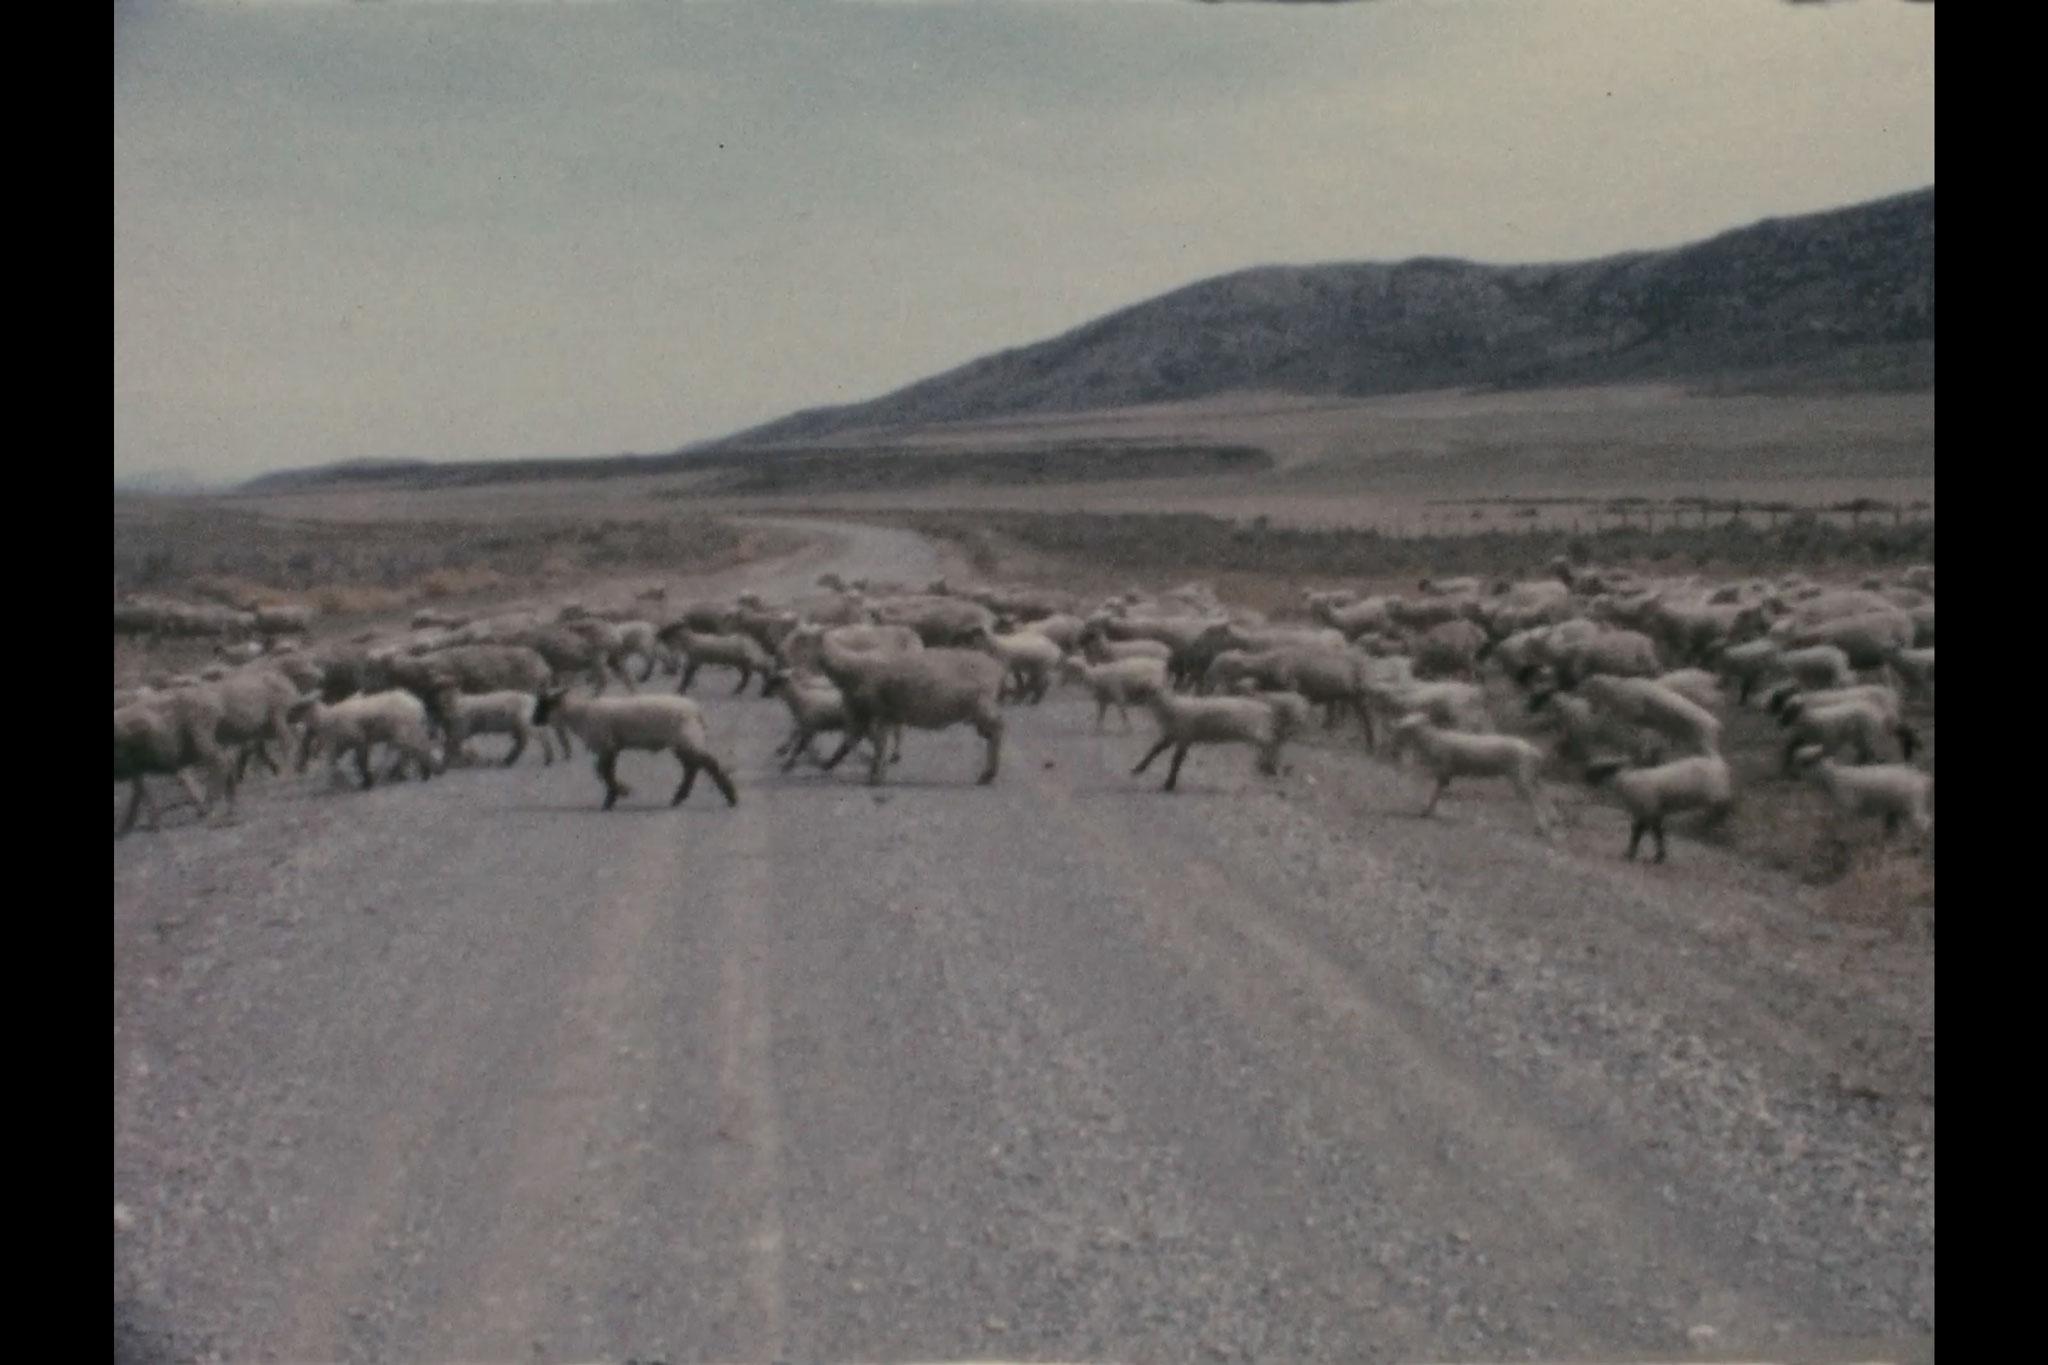 a large flock of sheep crossing a dirt road